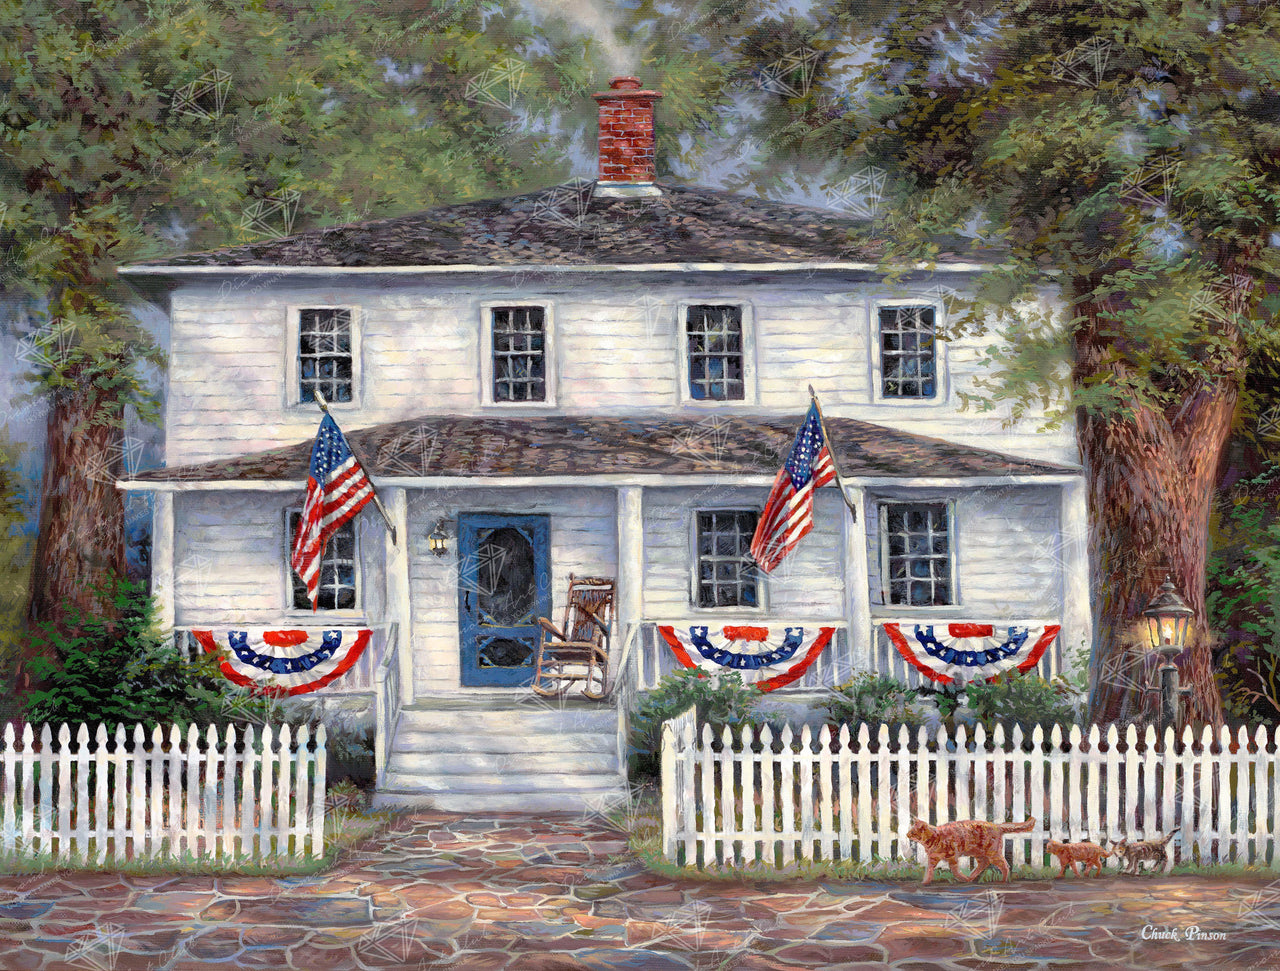 Diamond Painting American Roots 22" x 29″ (56cm x 74cm) / Round with 39 Colors including 2 ABs / 51,675